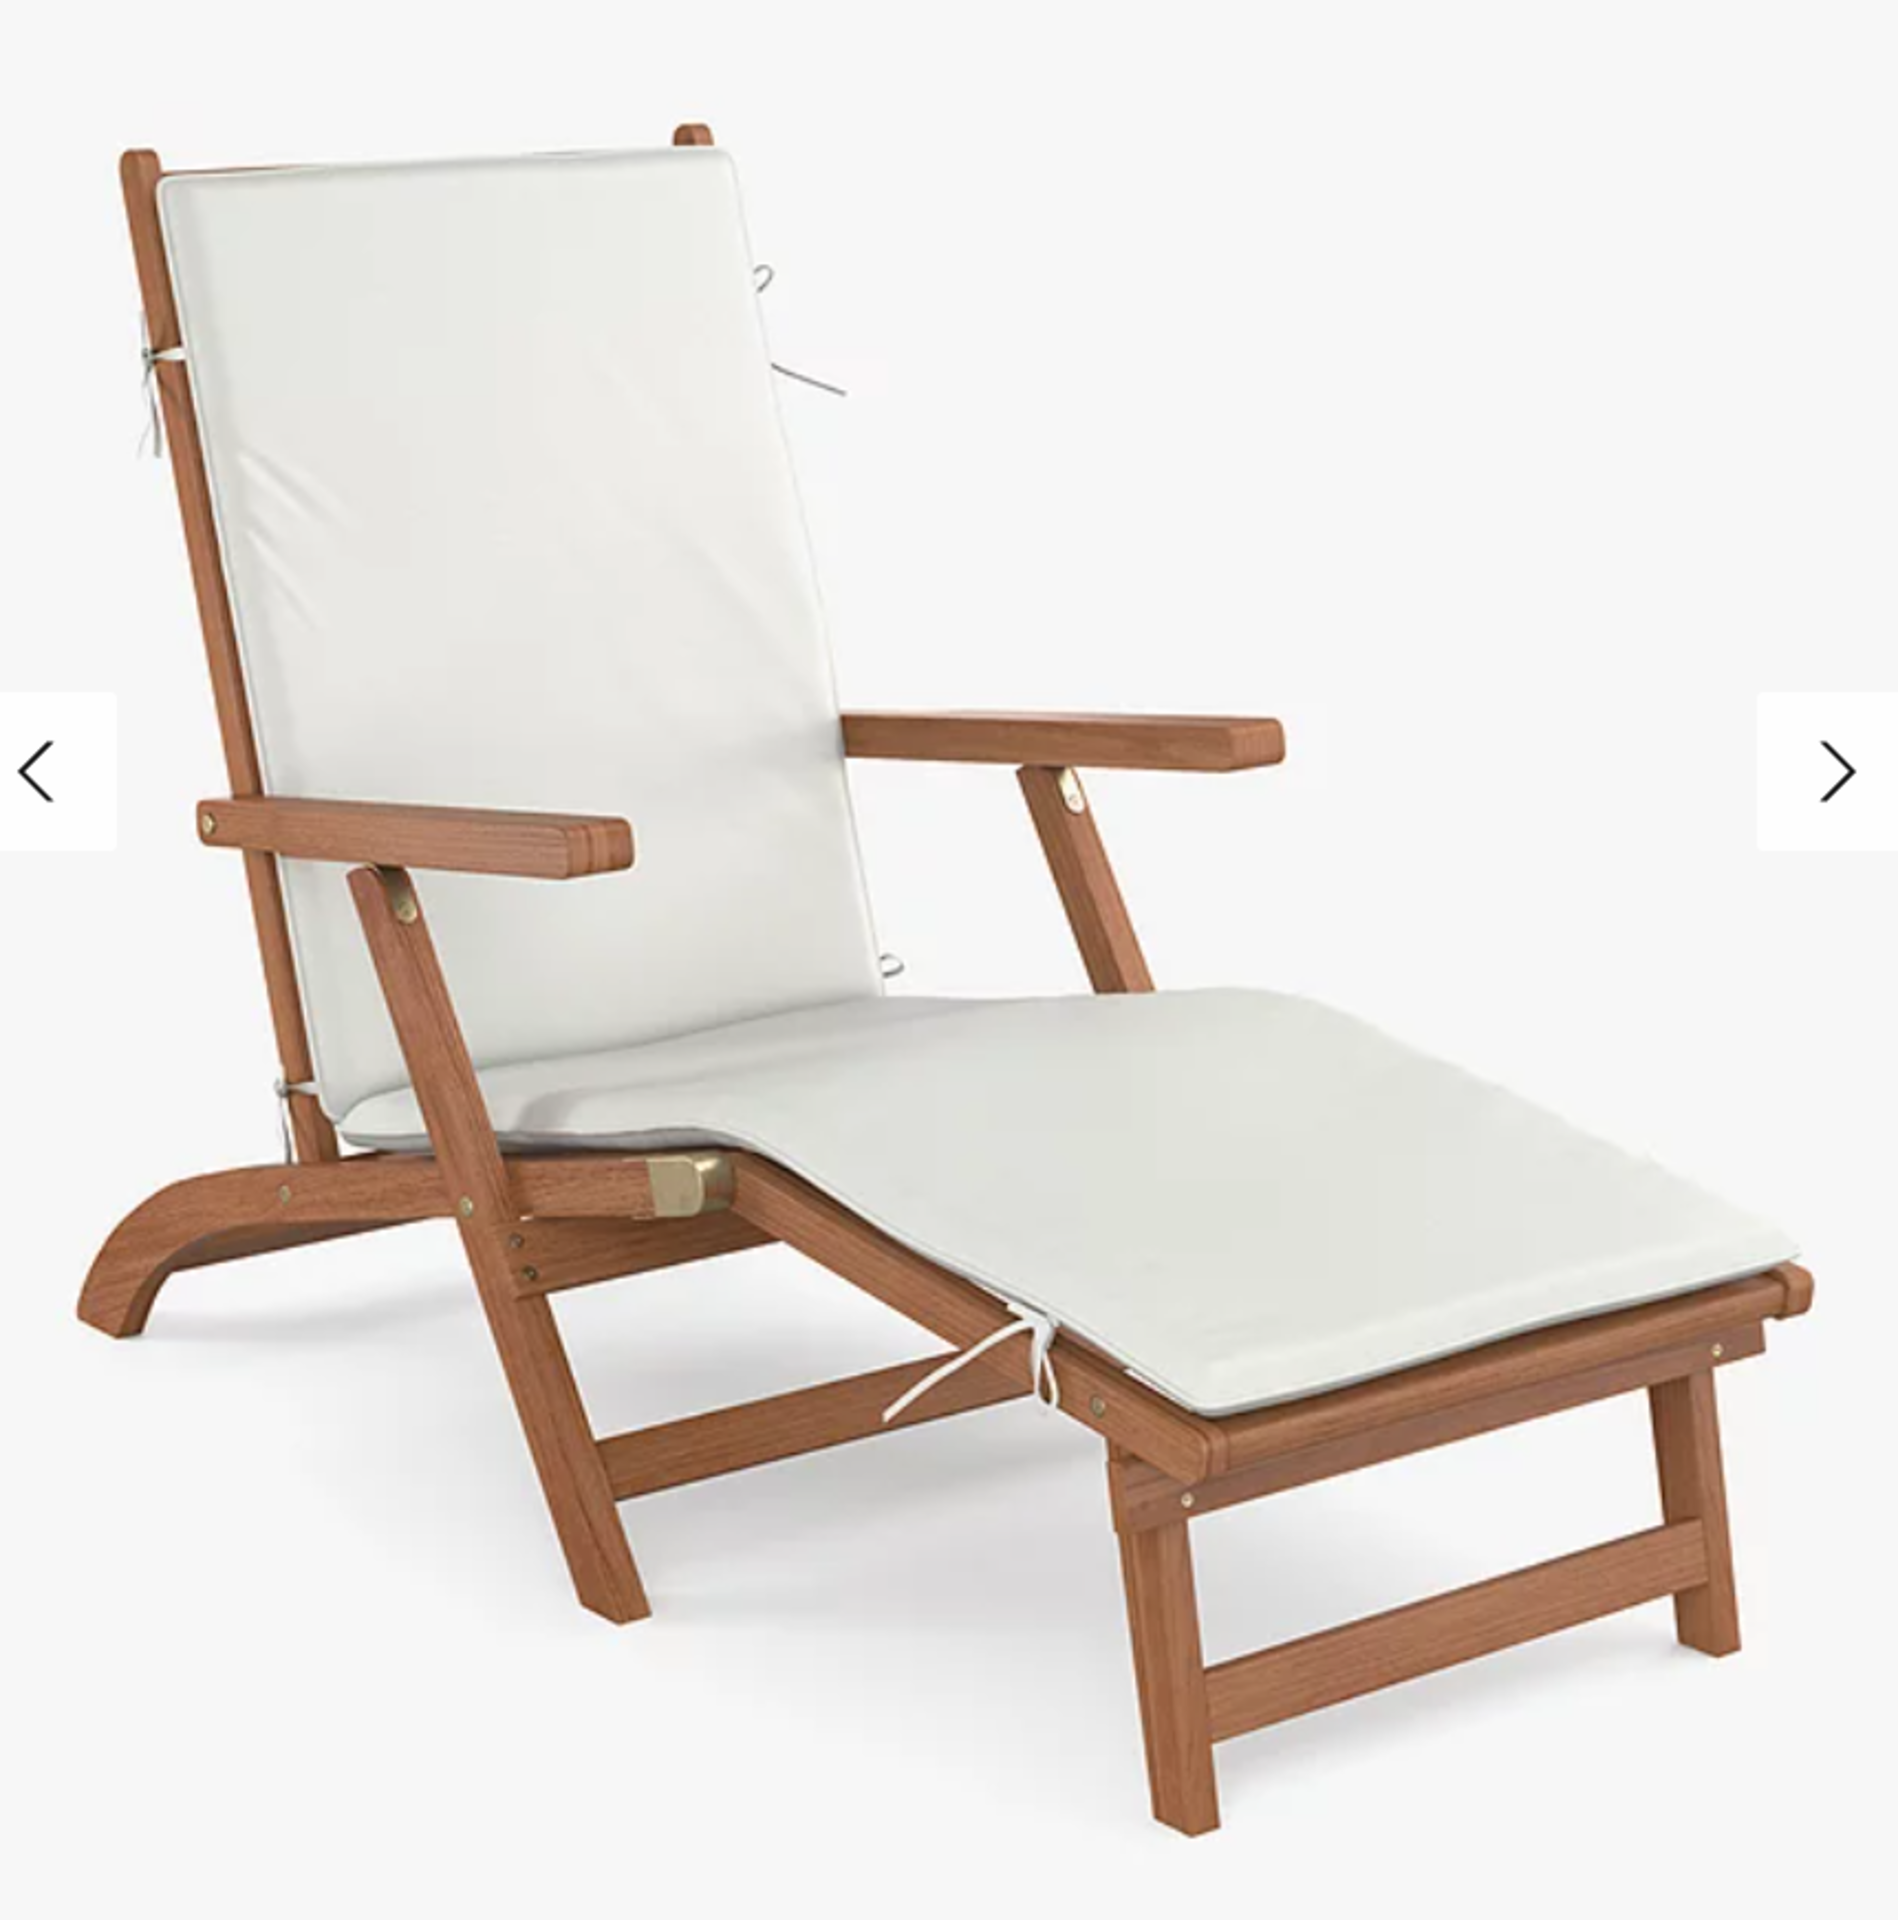 PALLET TO CONTAIN 6 x New & Boxed John Lewis Cove Garden Steamer Chair, FSC-Certified (Eucalyptus